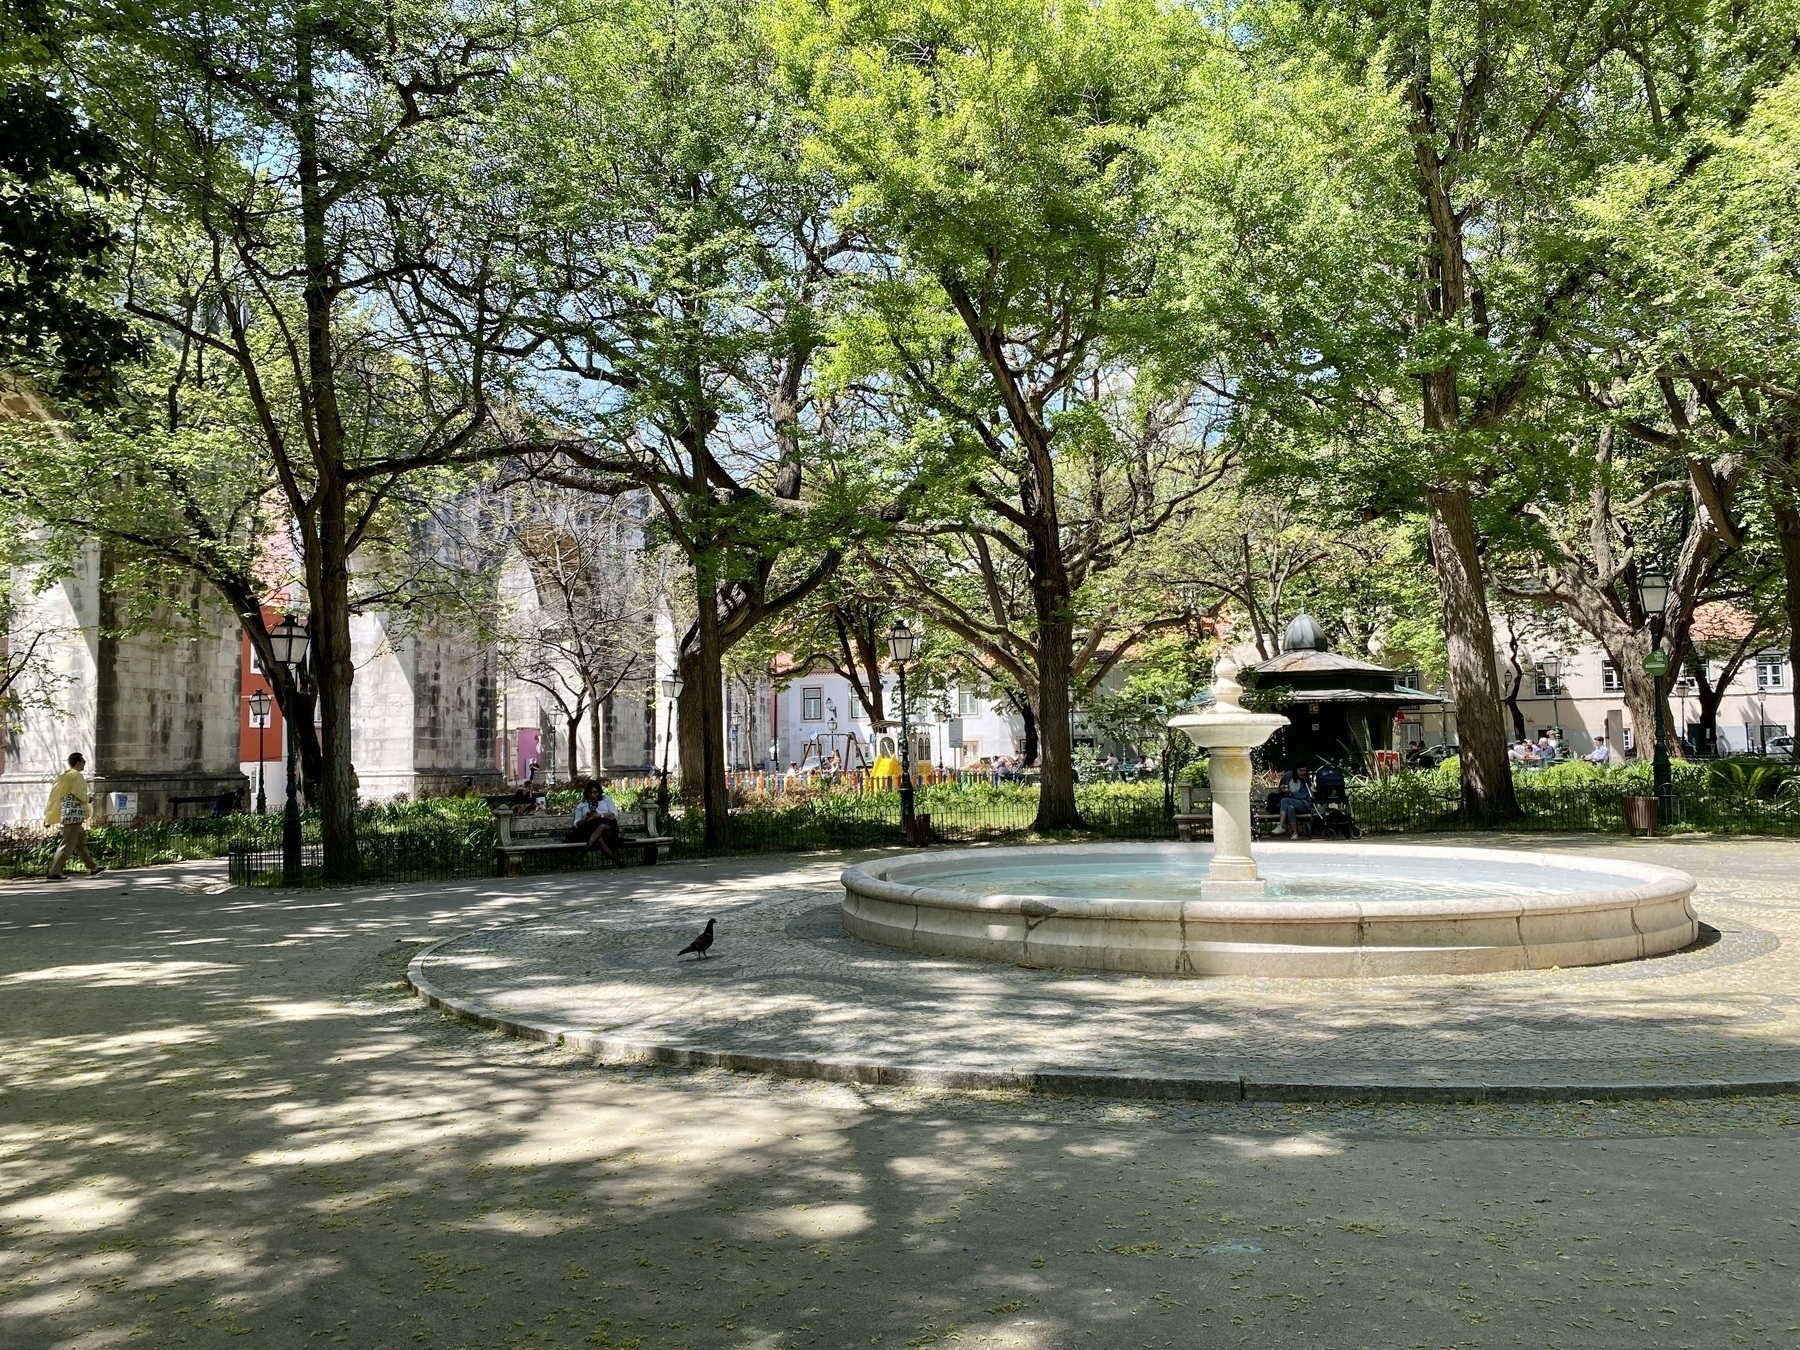 Circular fountain surrounded by trees in a city square